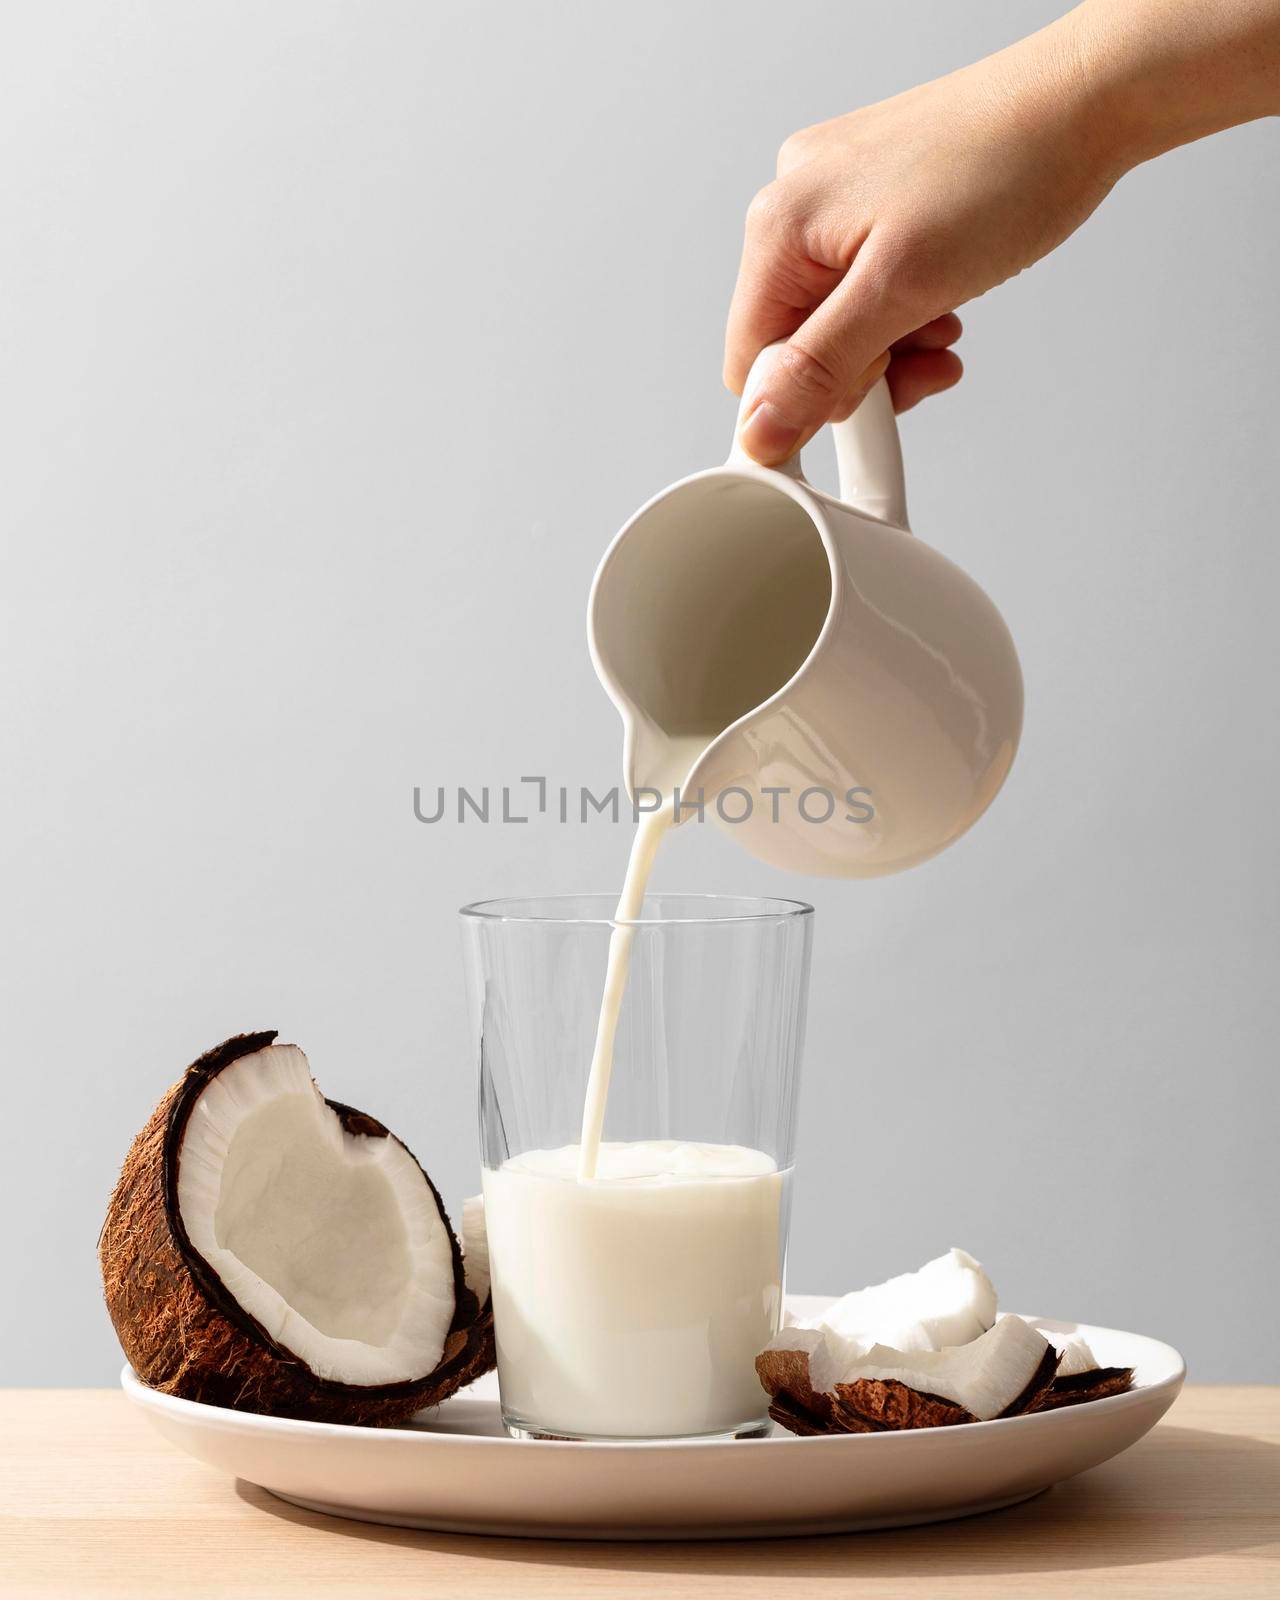 front view hand pouring coconut milk glass. High quality photo by Zahard